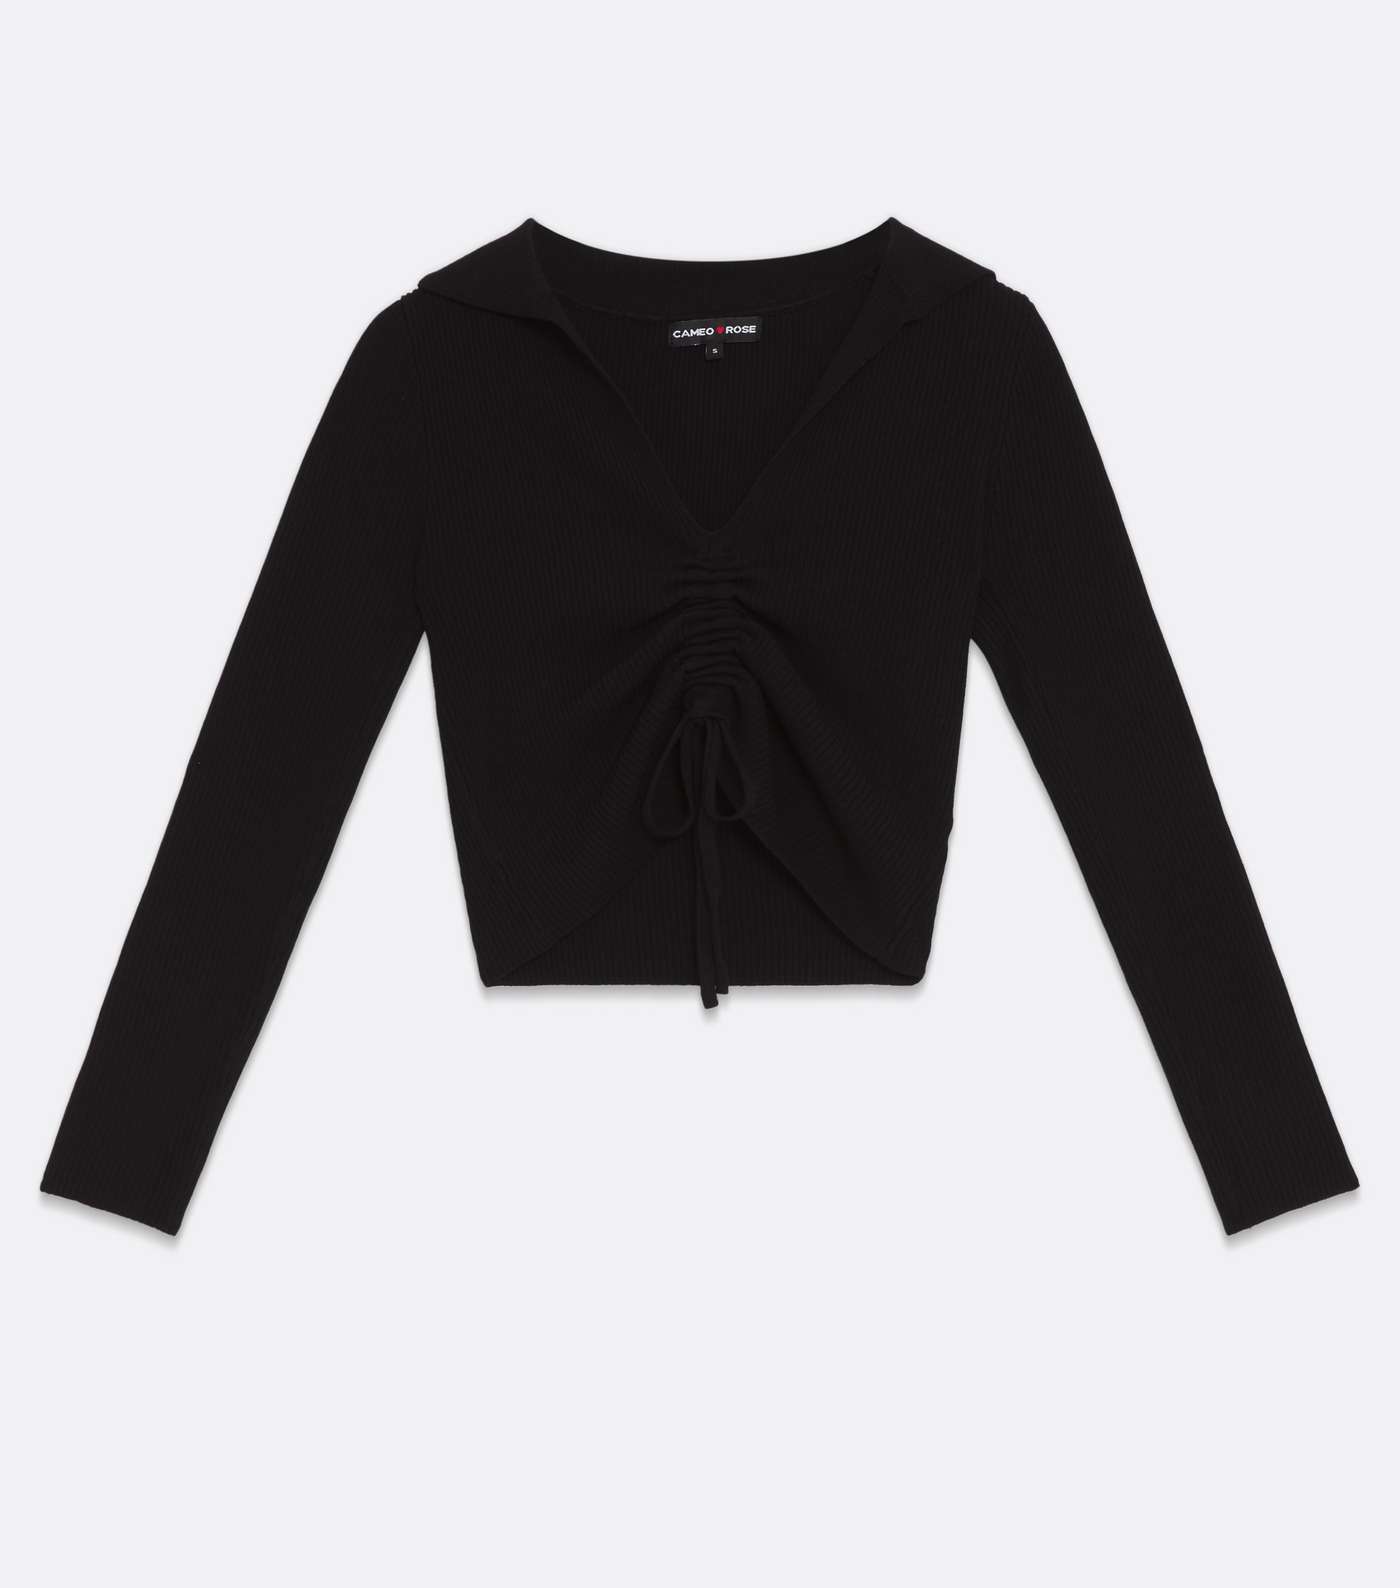 Cameo Rose Black Knit Collared Ruched Crop Top Image 5